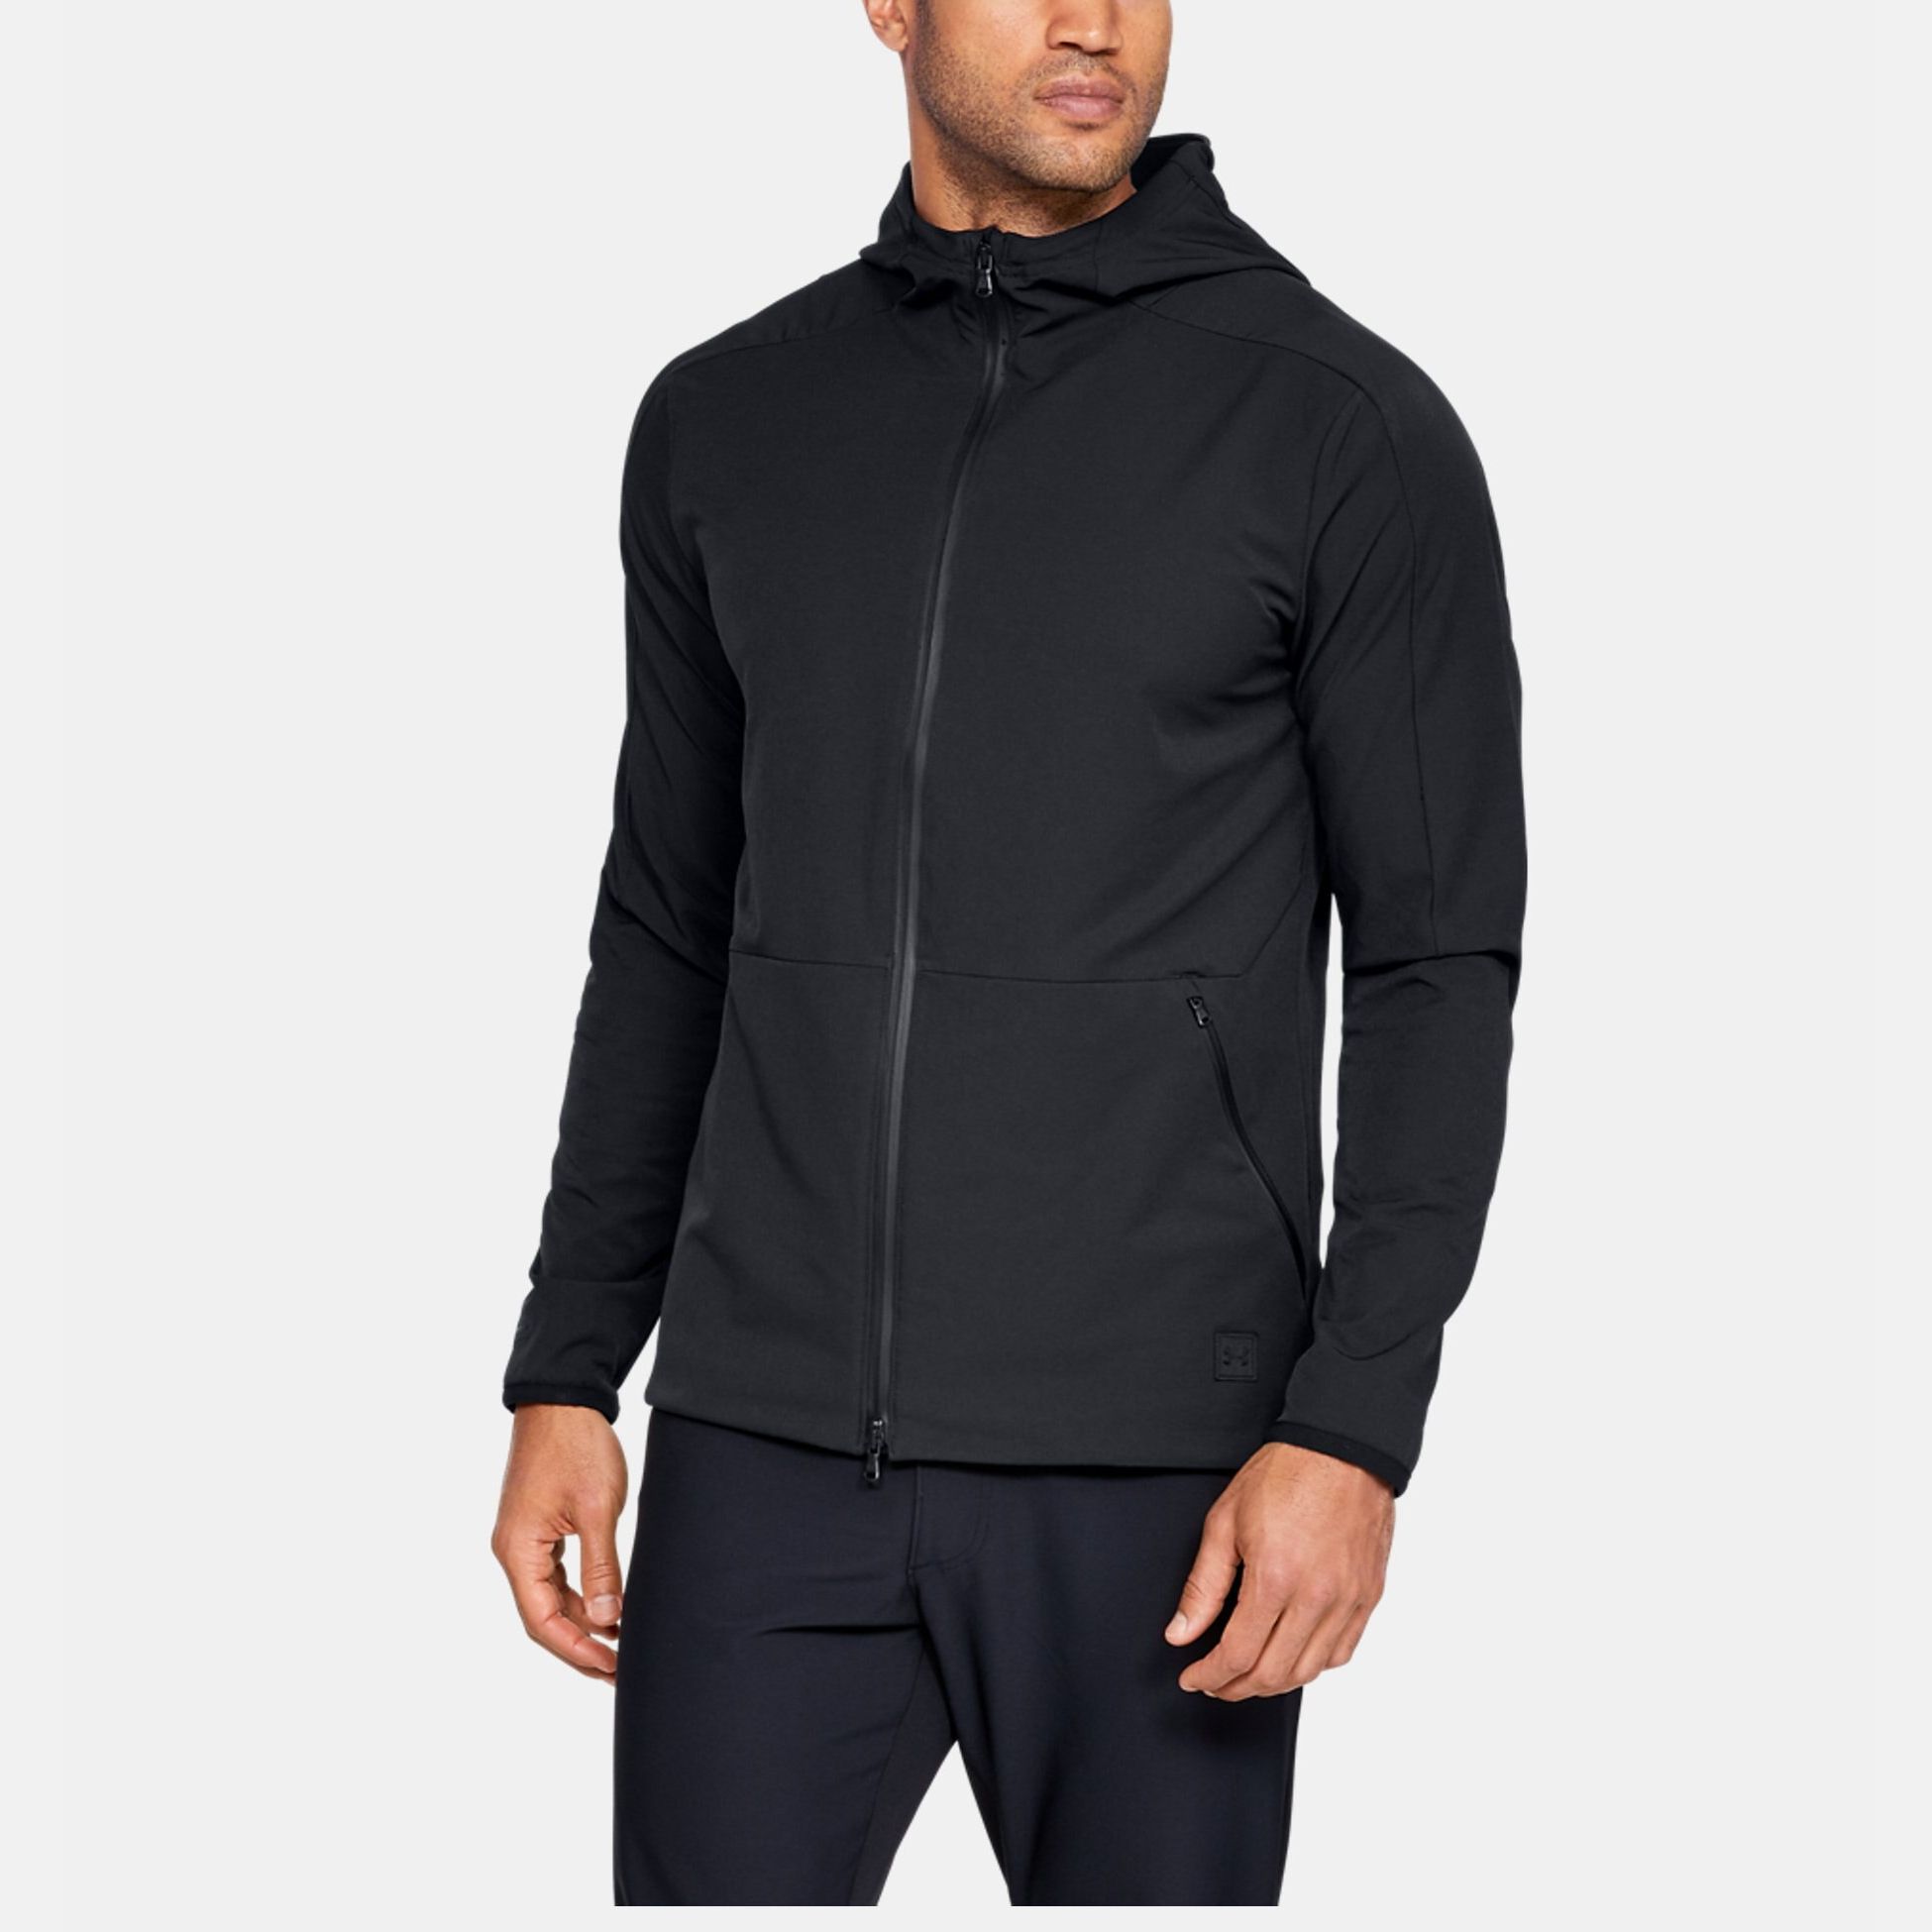 Jackets & Vests | Clothing | Under armour Perpetual Jacket 0690 | Fitness